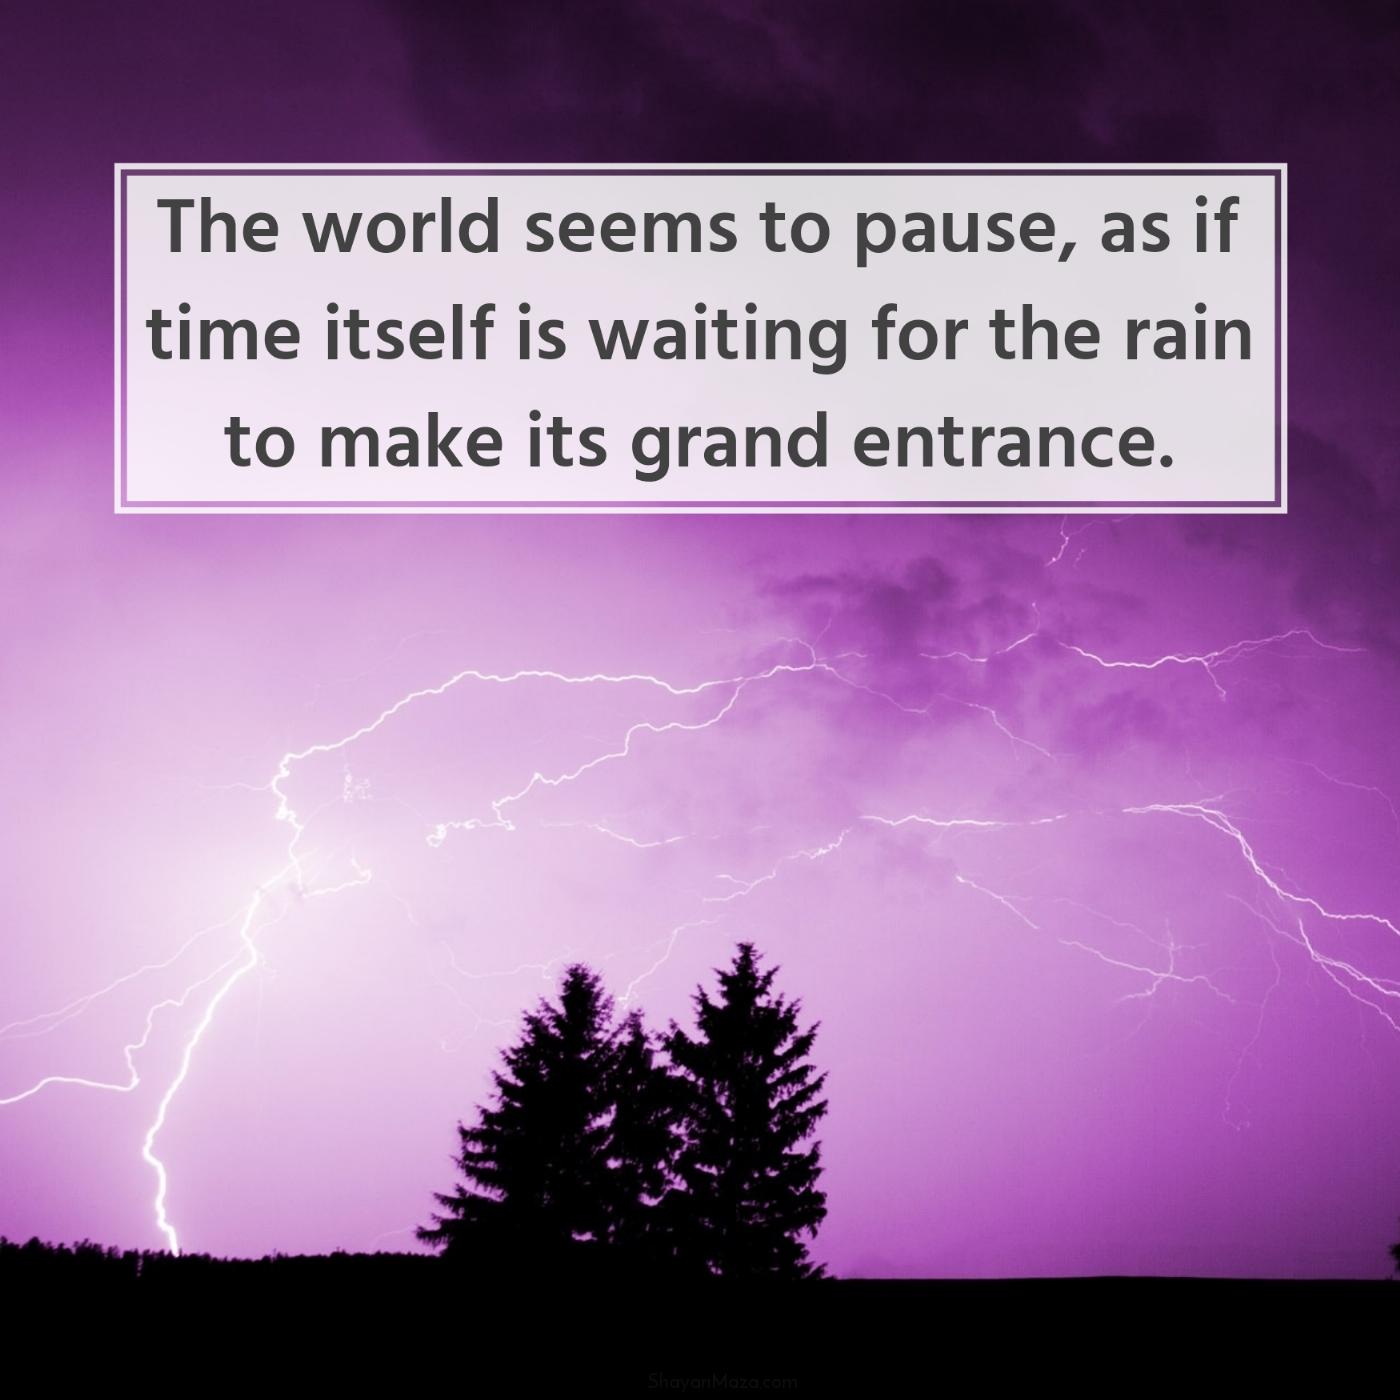 The world seems to pause as if time itself is waiting for the rain